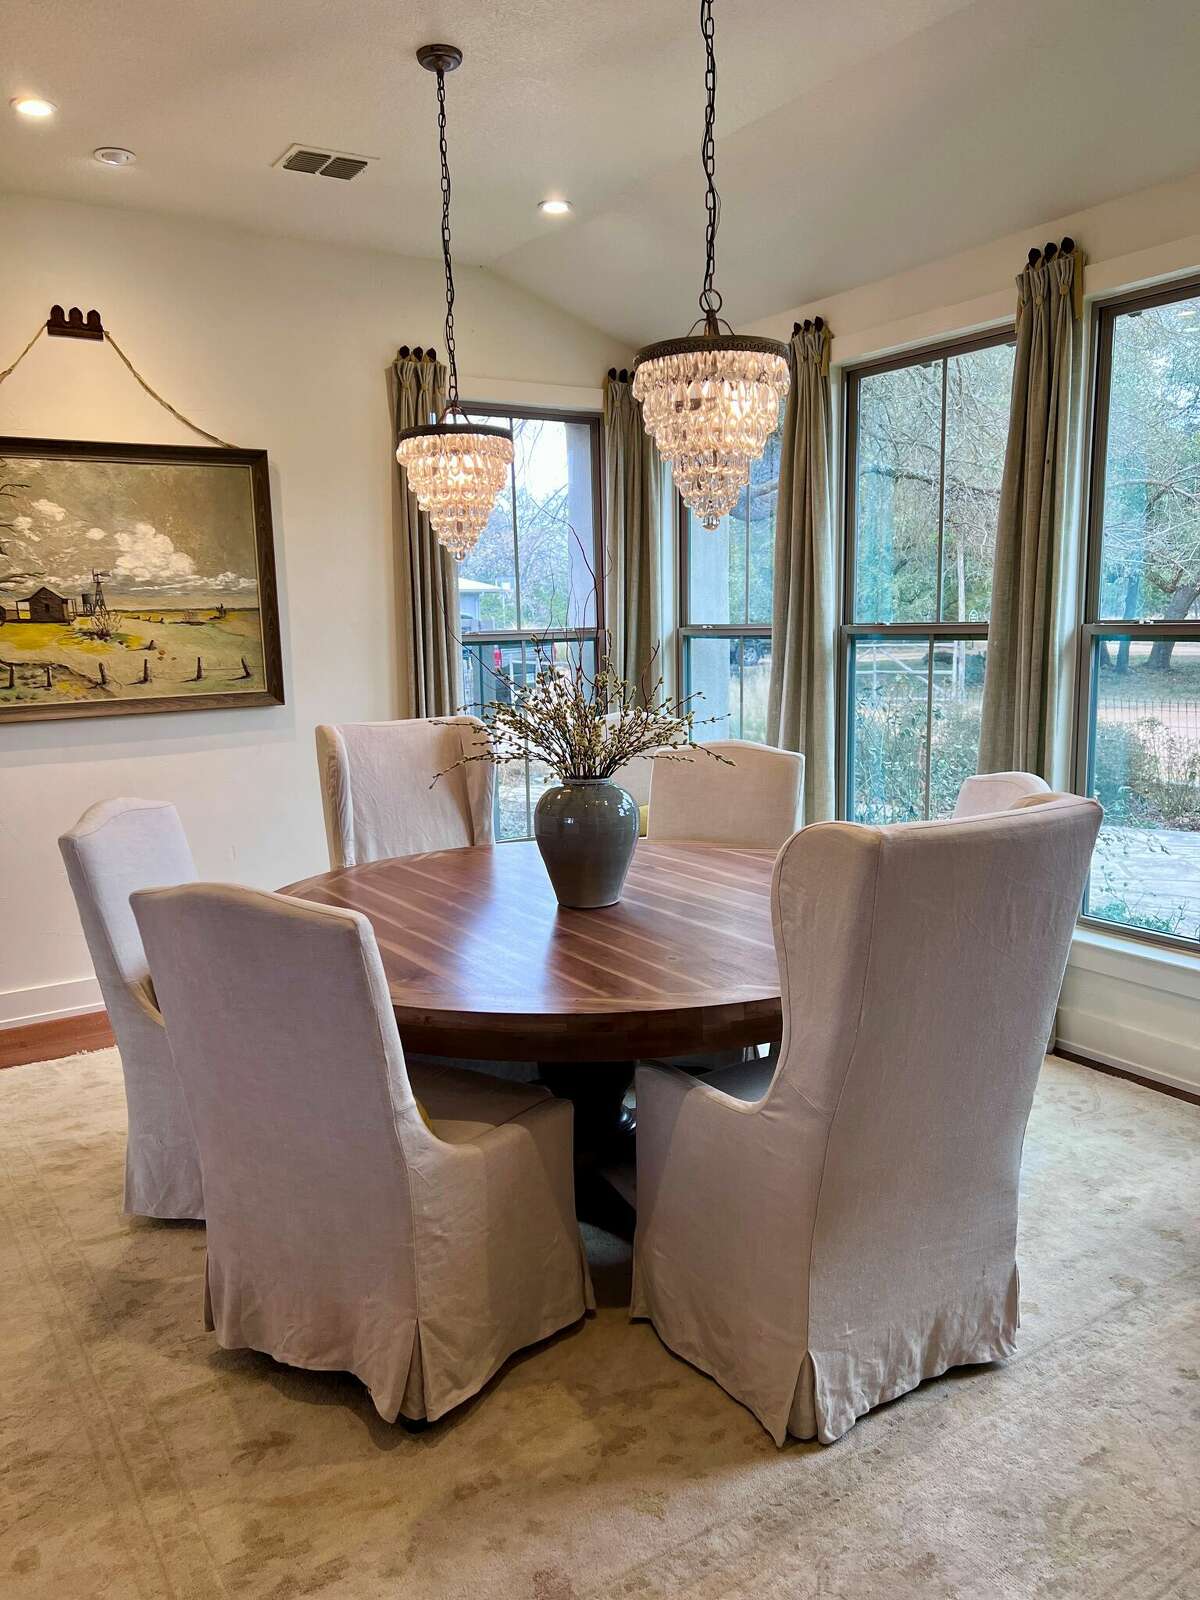 The elegant dining room has painted walls, curtained windows and two elegant chandeliers hanging above a round wood table surrounded by six chic skirted parson chairs.